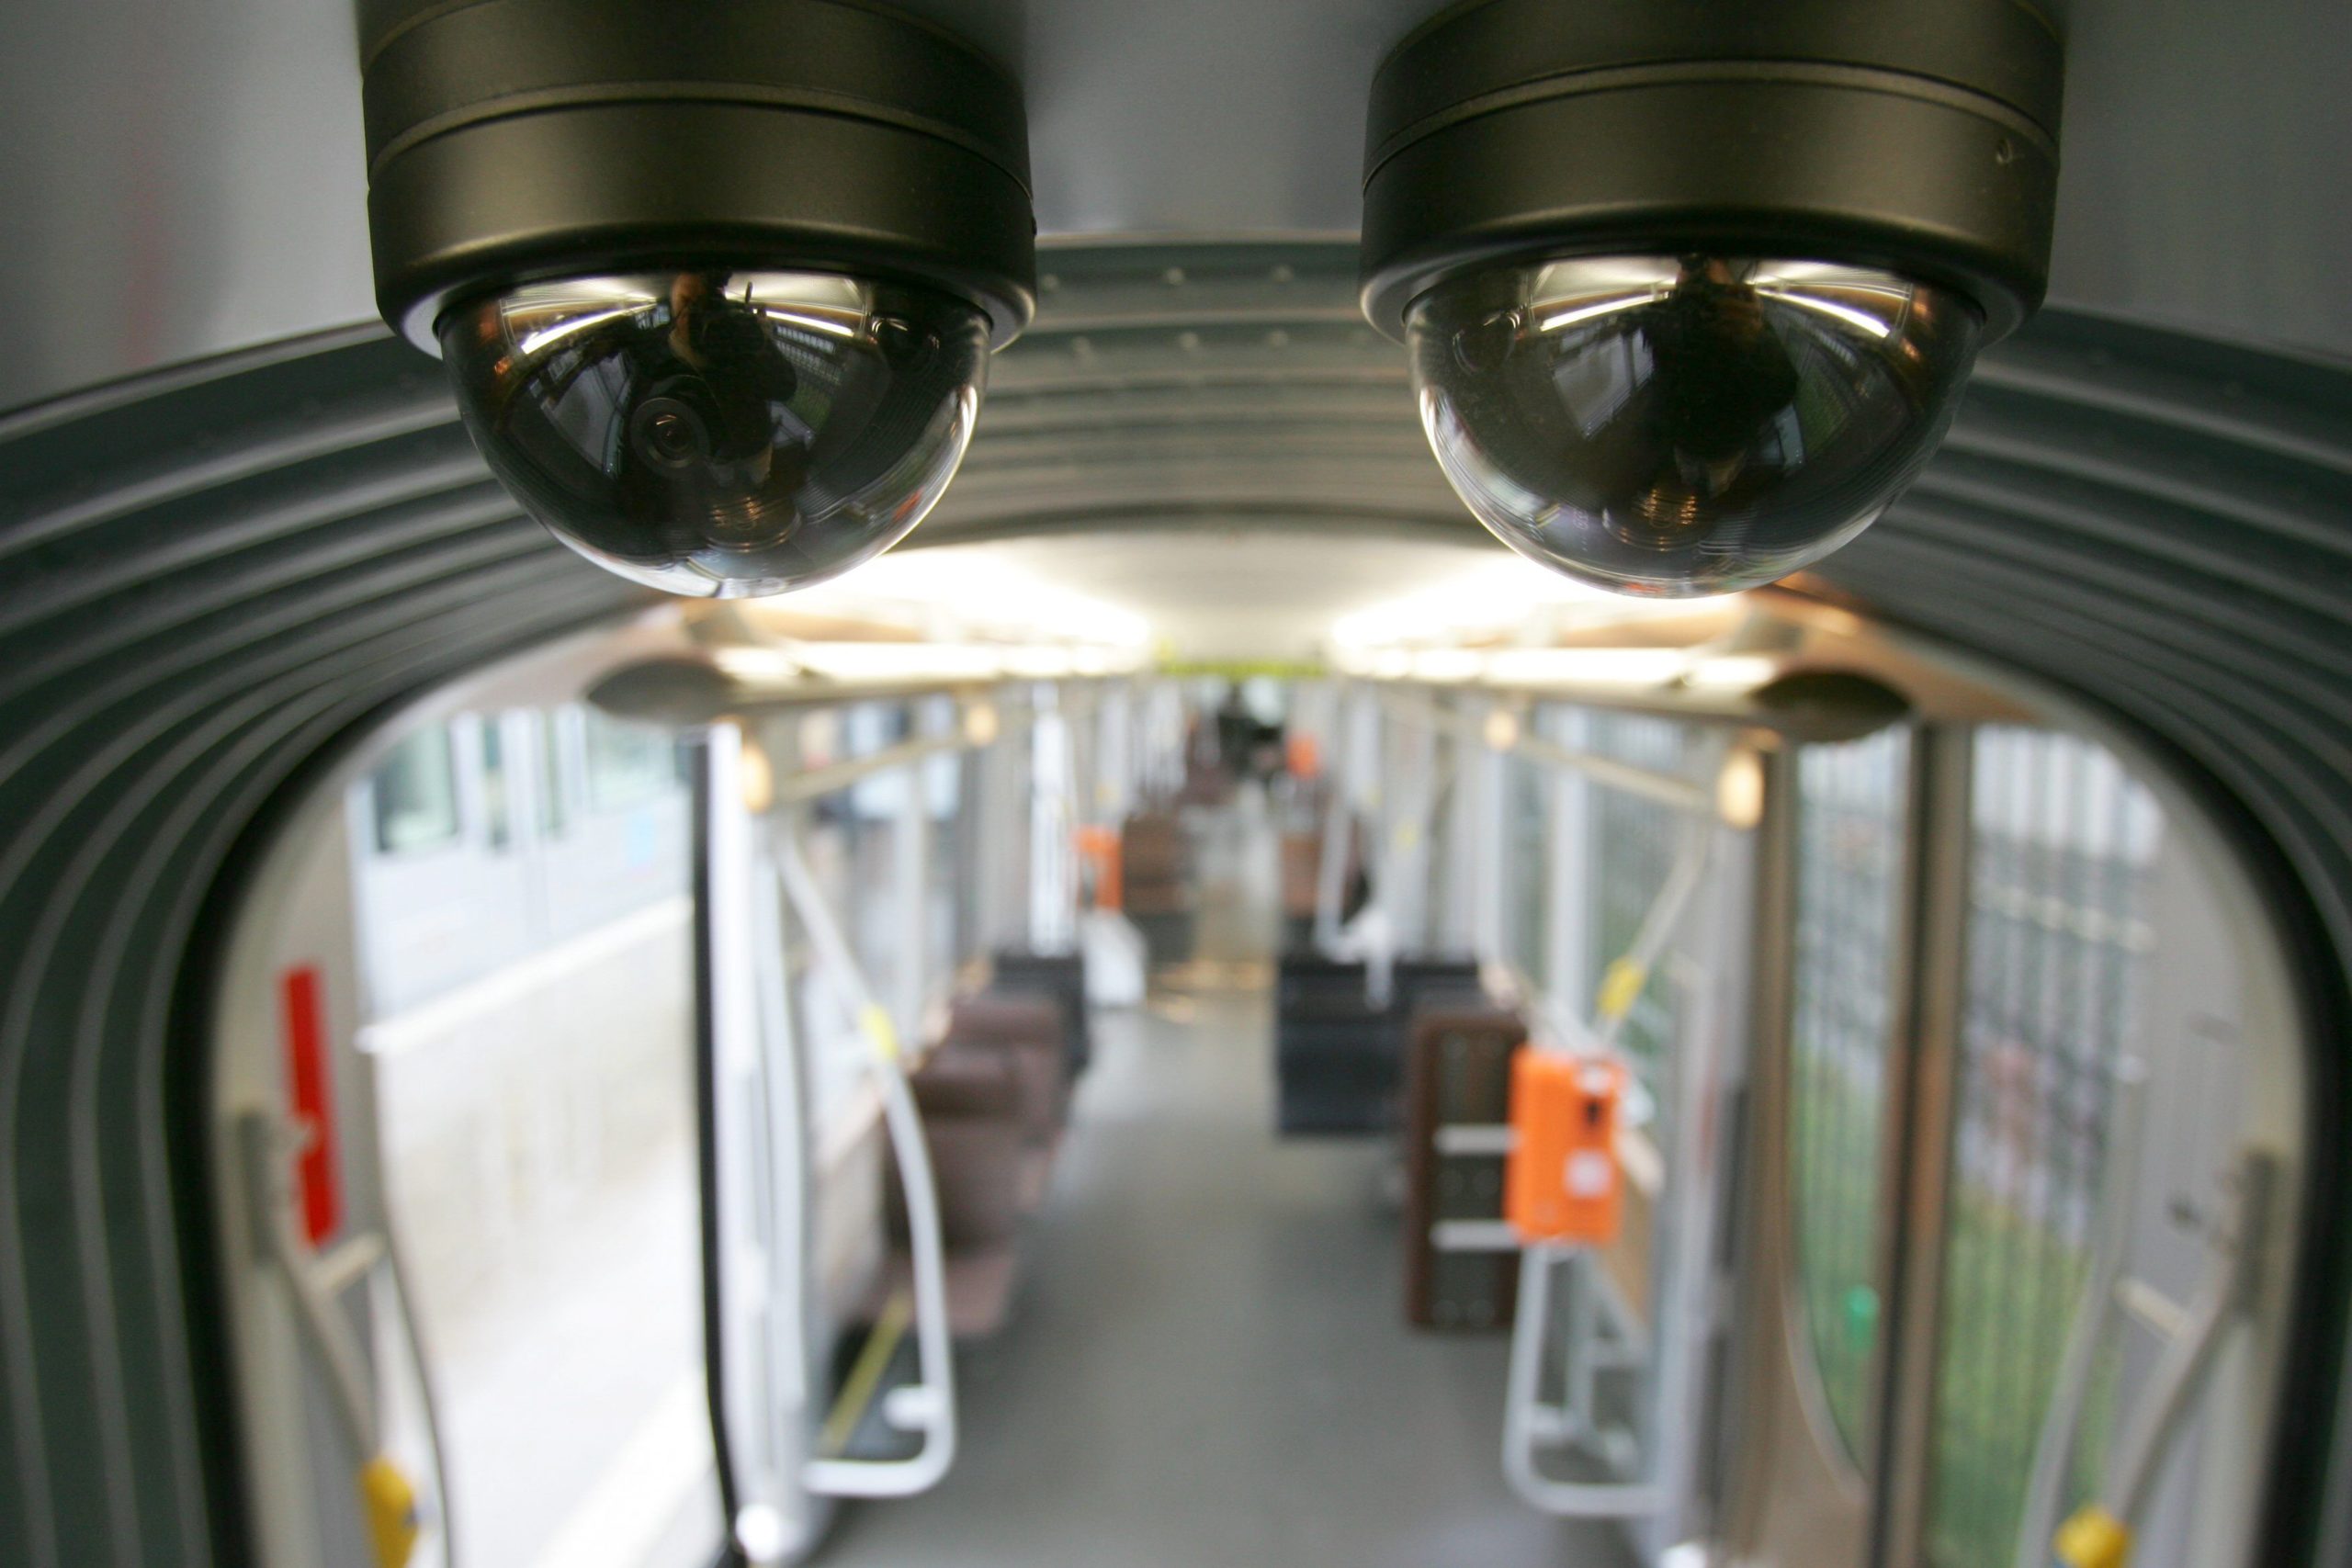 Brussels police gets access to live Stib/Mivb surveillance video feed